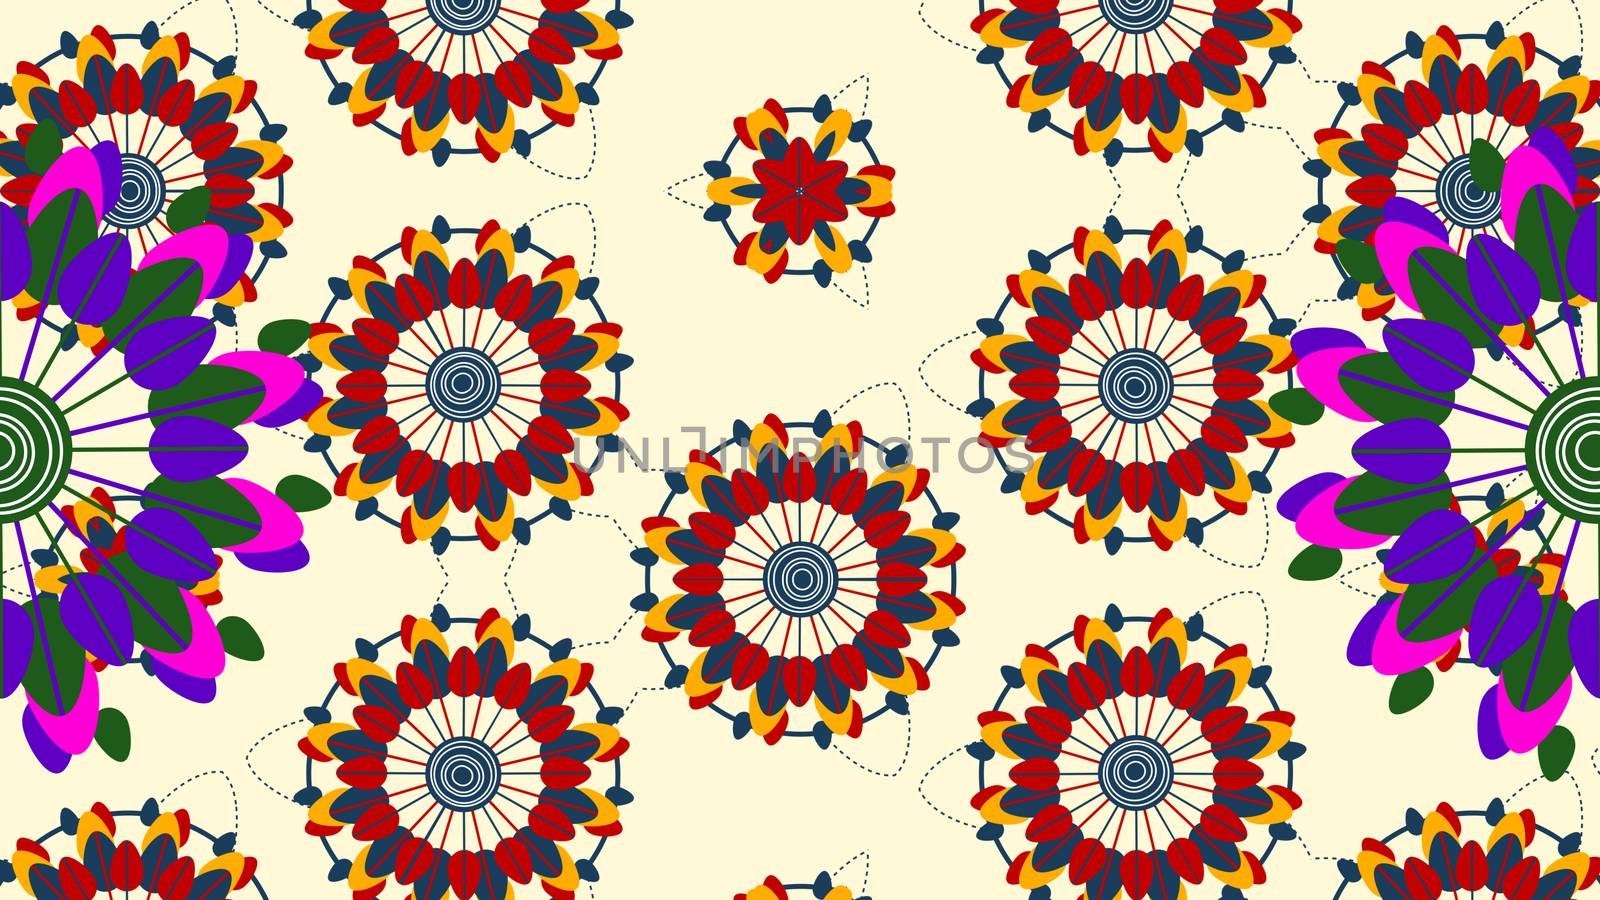 Animation flowers shaping bright patterns by klss